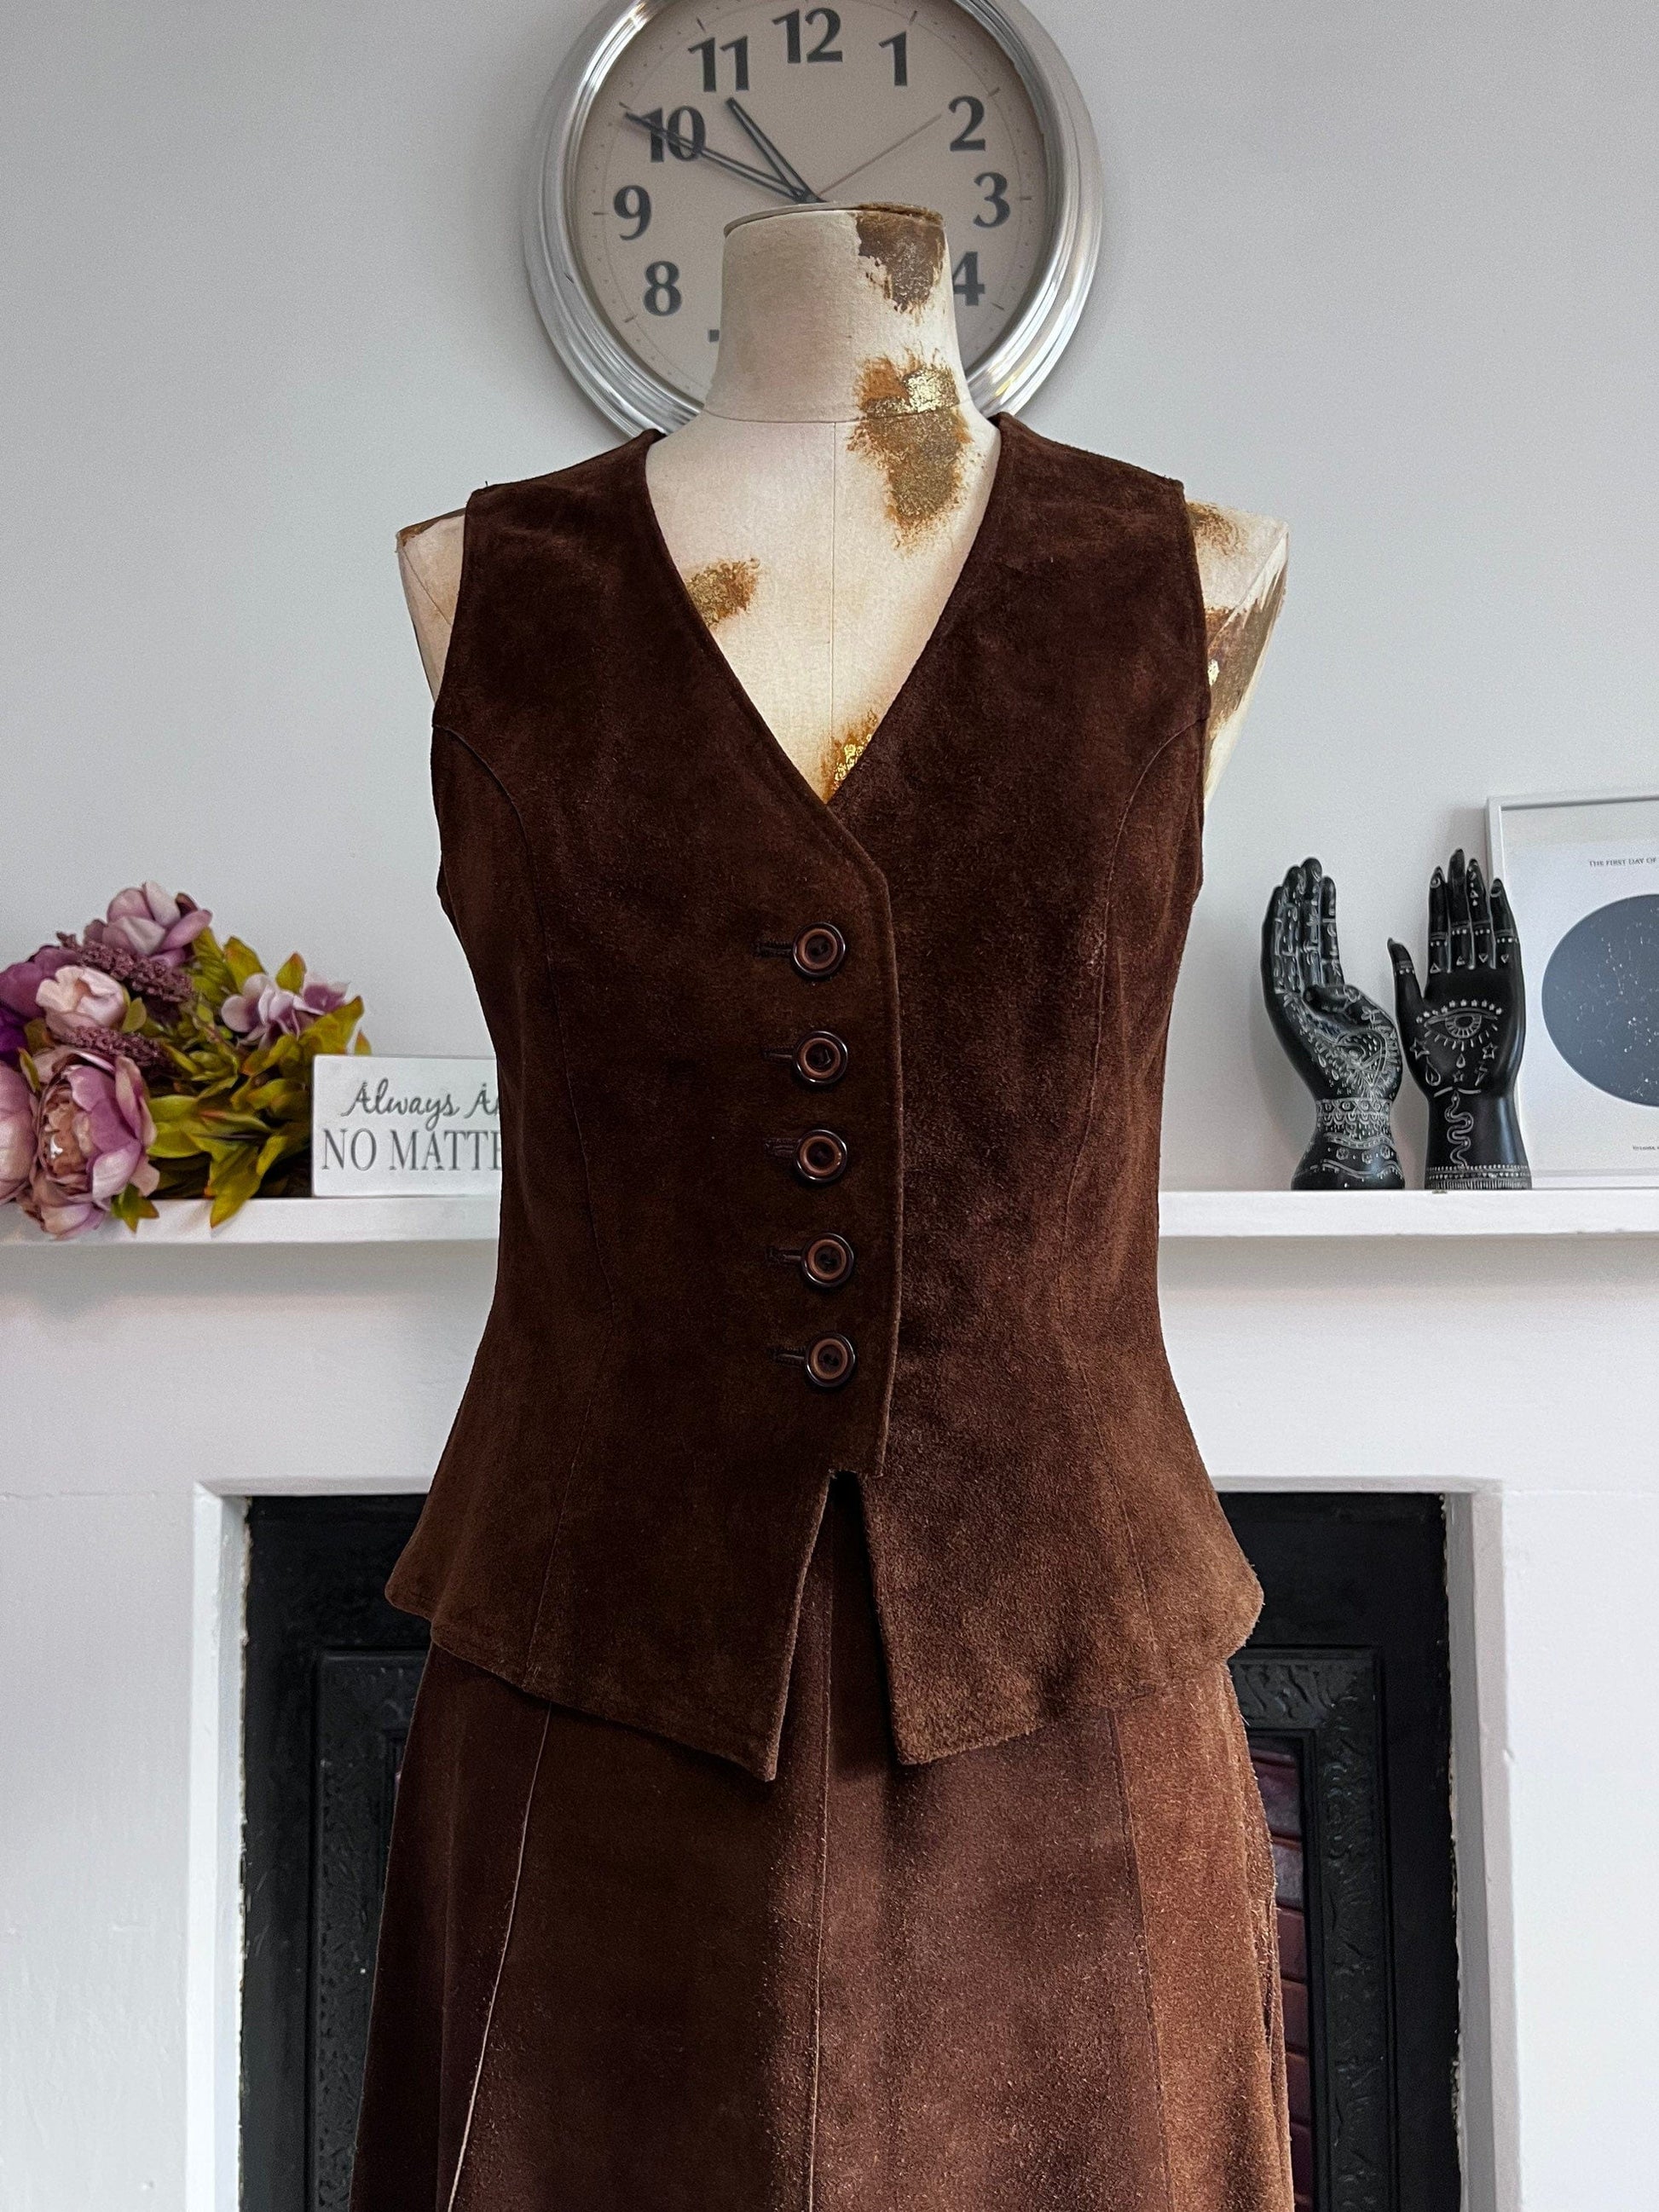 70s Vintage Suede Suit Waistcoat & Skirt Suede Leather Skirt Suede Waistcoat, Vintage Two Piece Set in Brown, 70s Fashion Suede